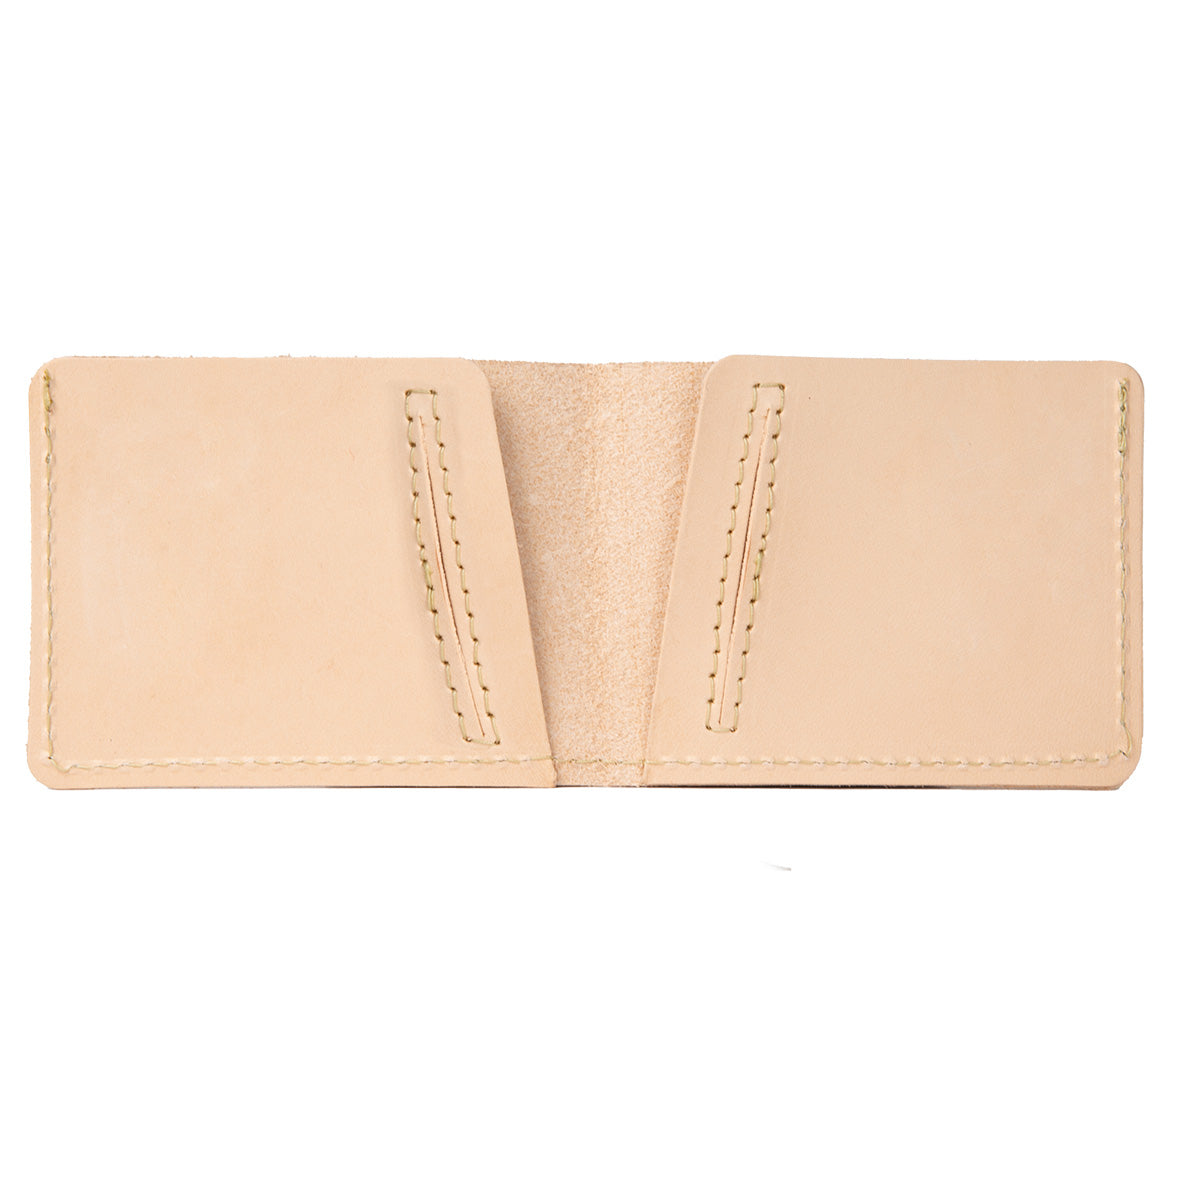 Mens Bifold Leather Wallet - Handcrafted in the USA – Rustico